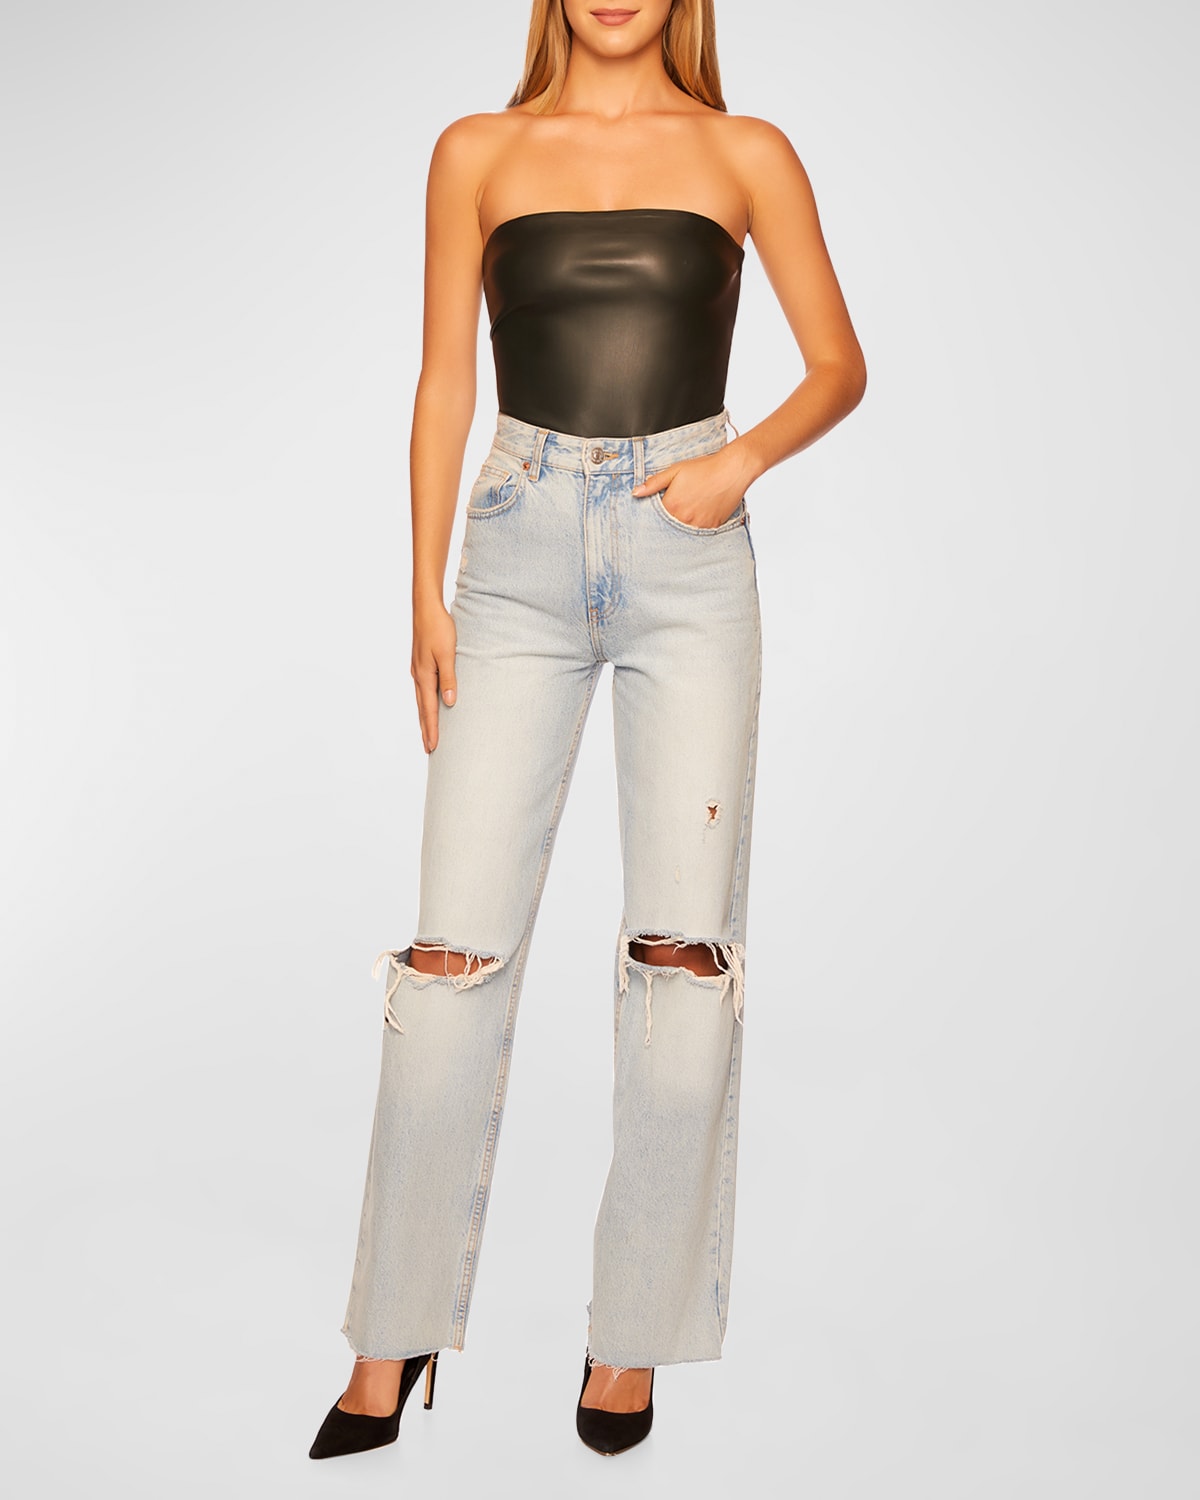 Faux-Leather Tube Top